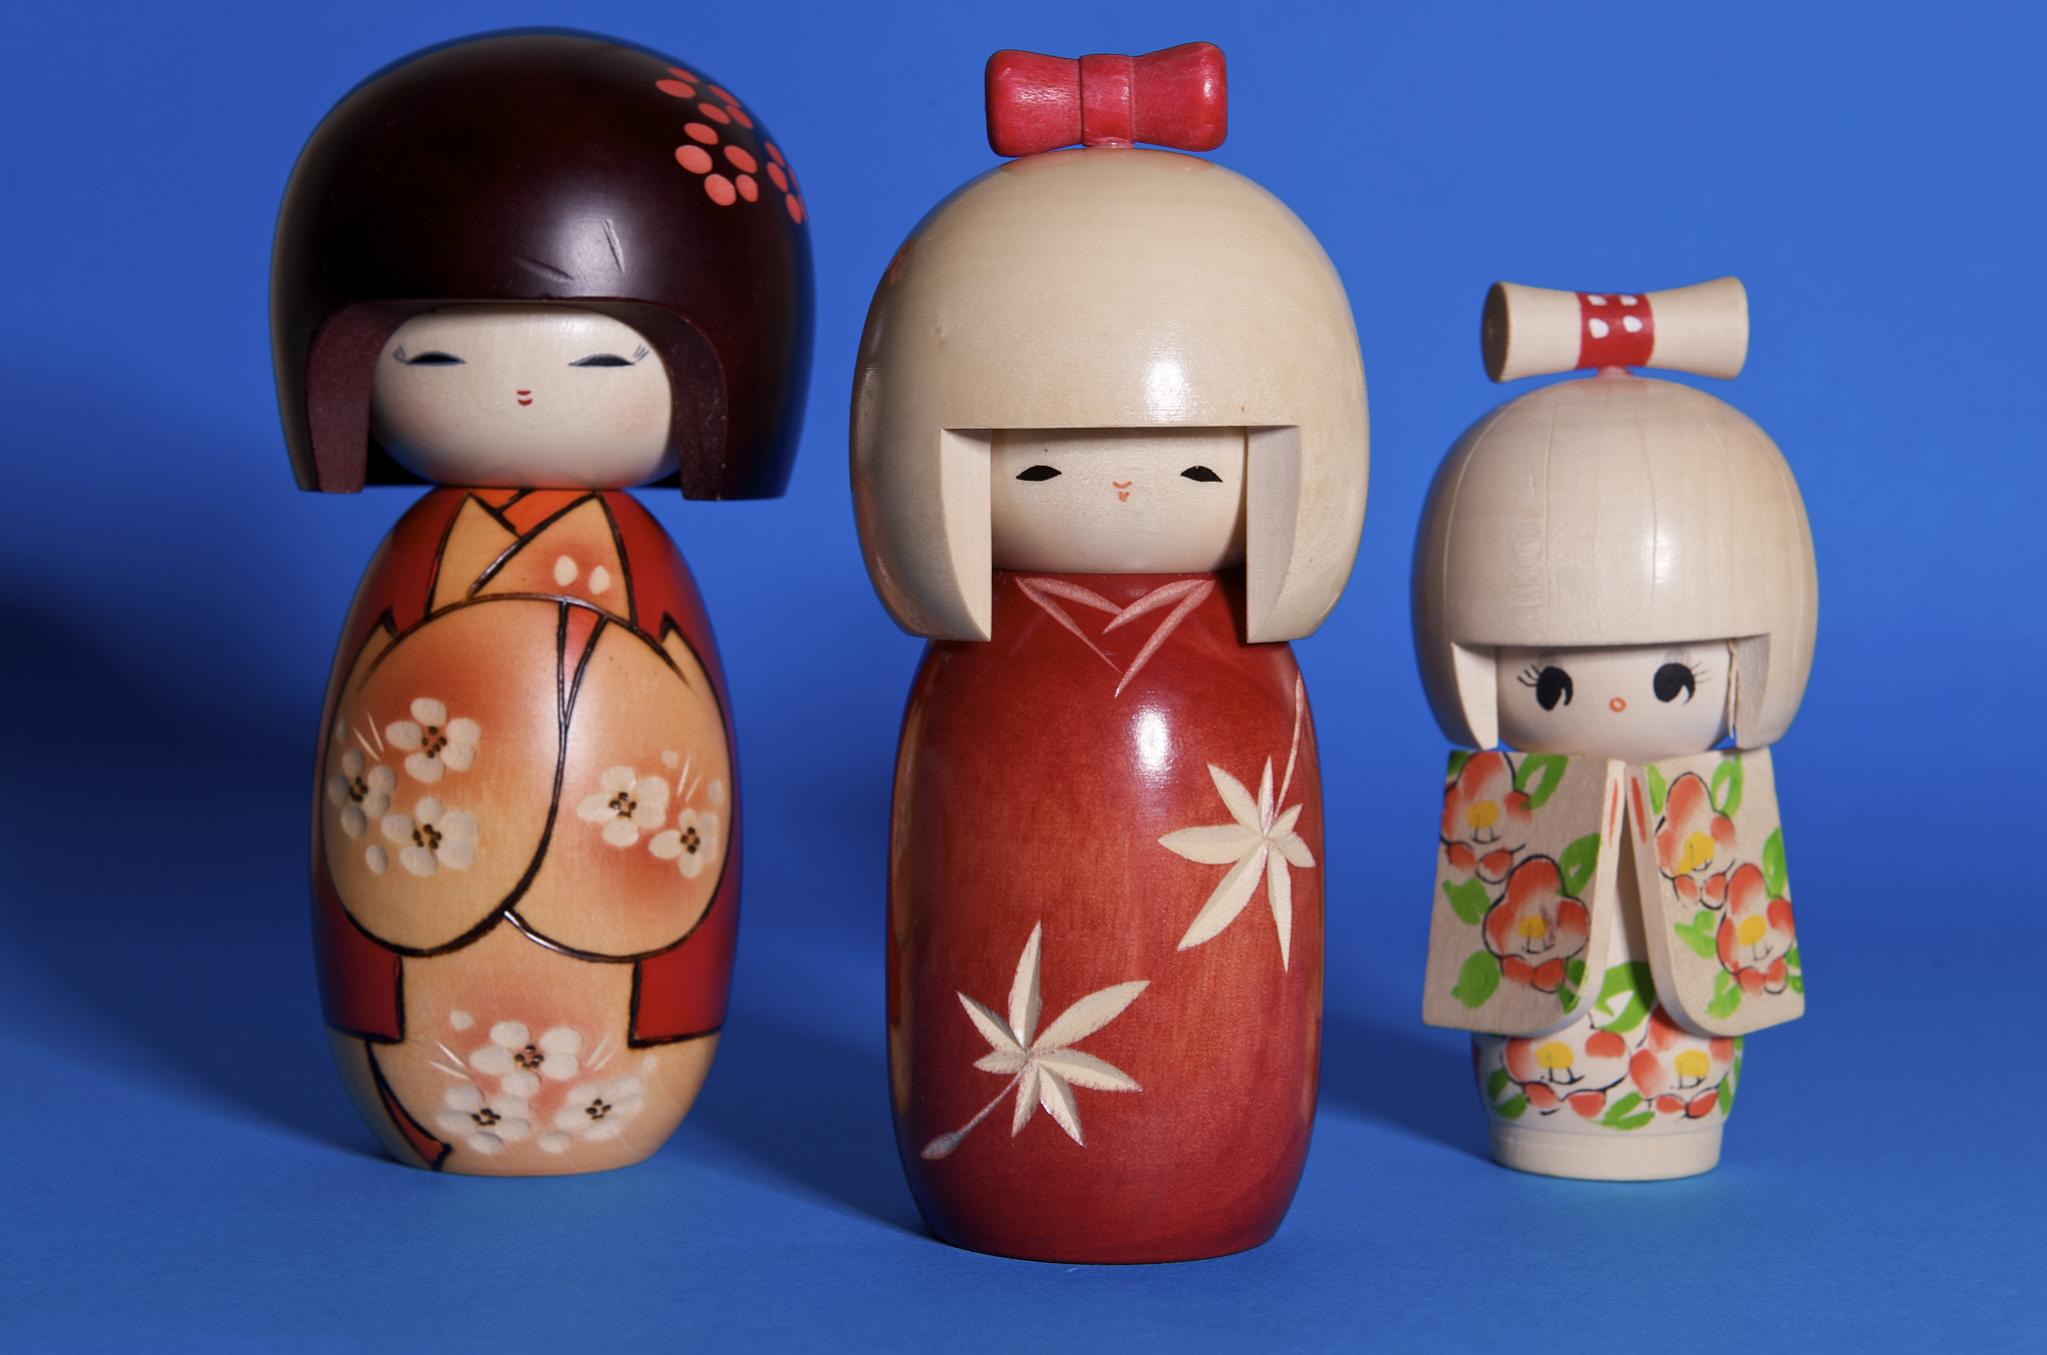 a set of three dolls are shown sitting side by side